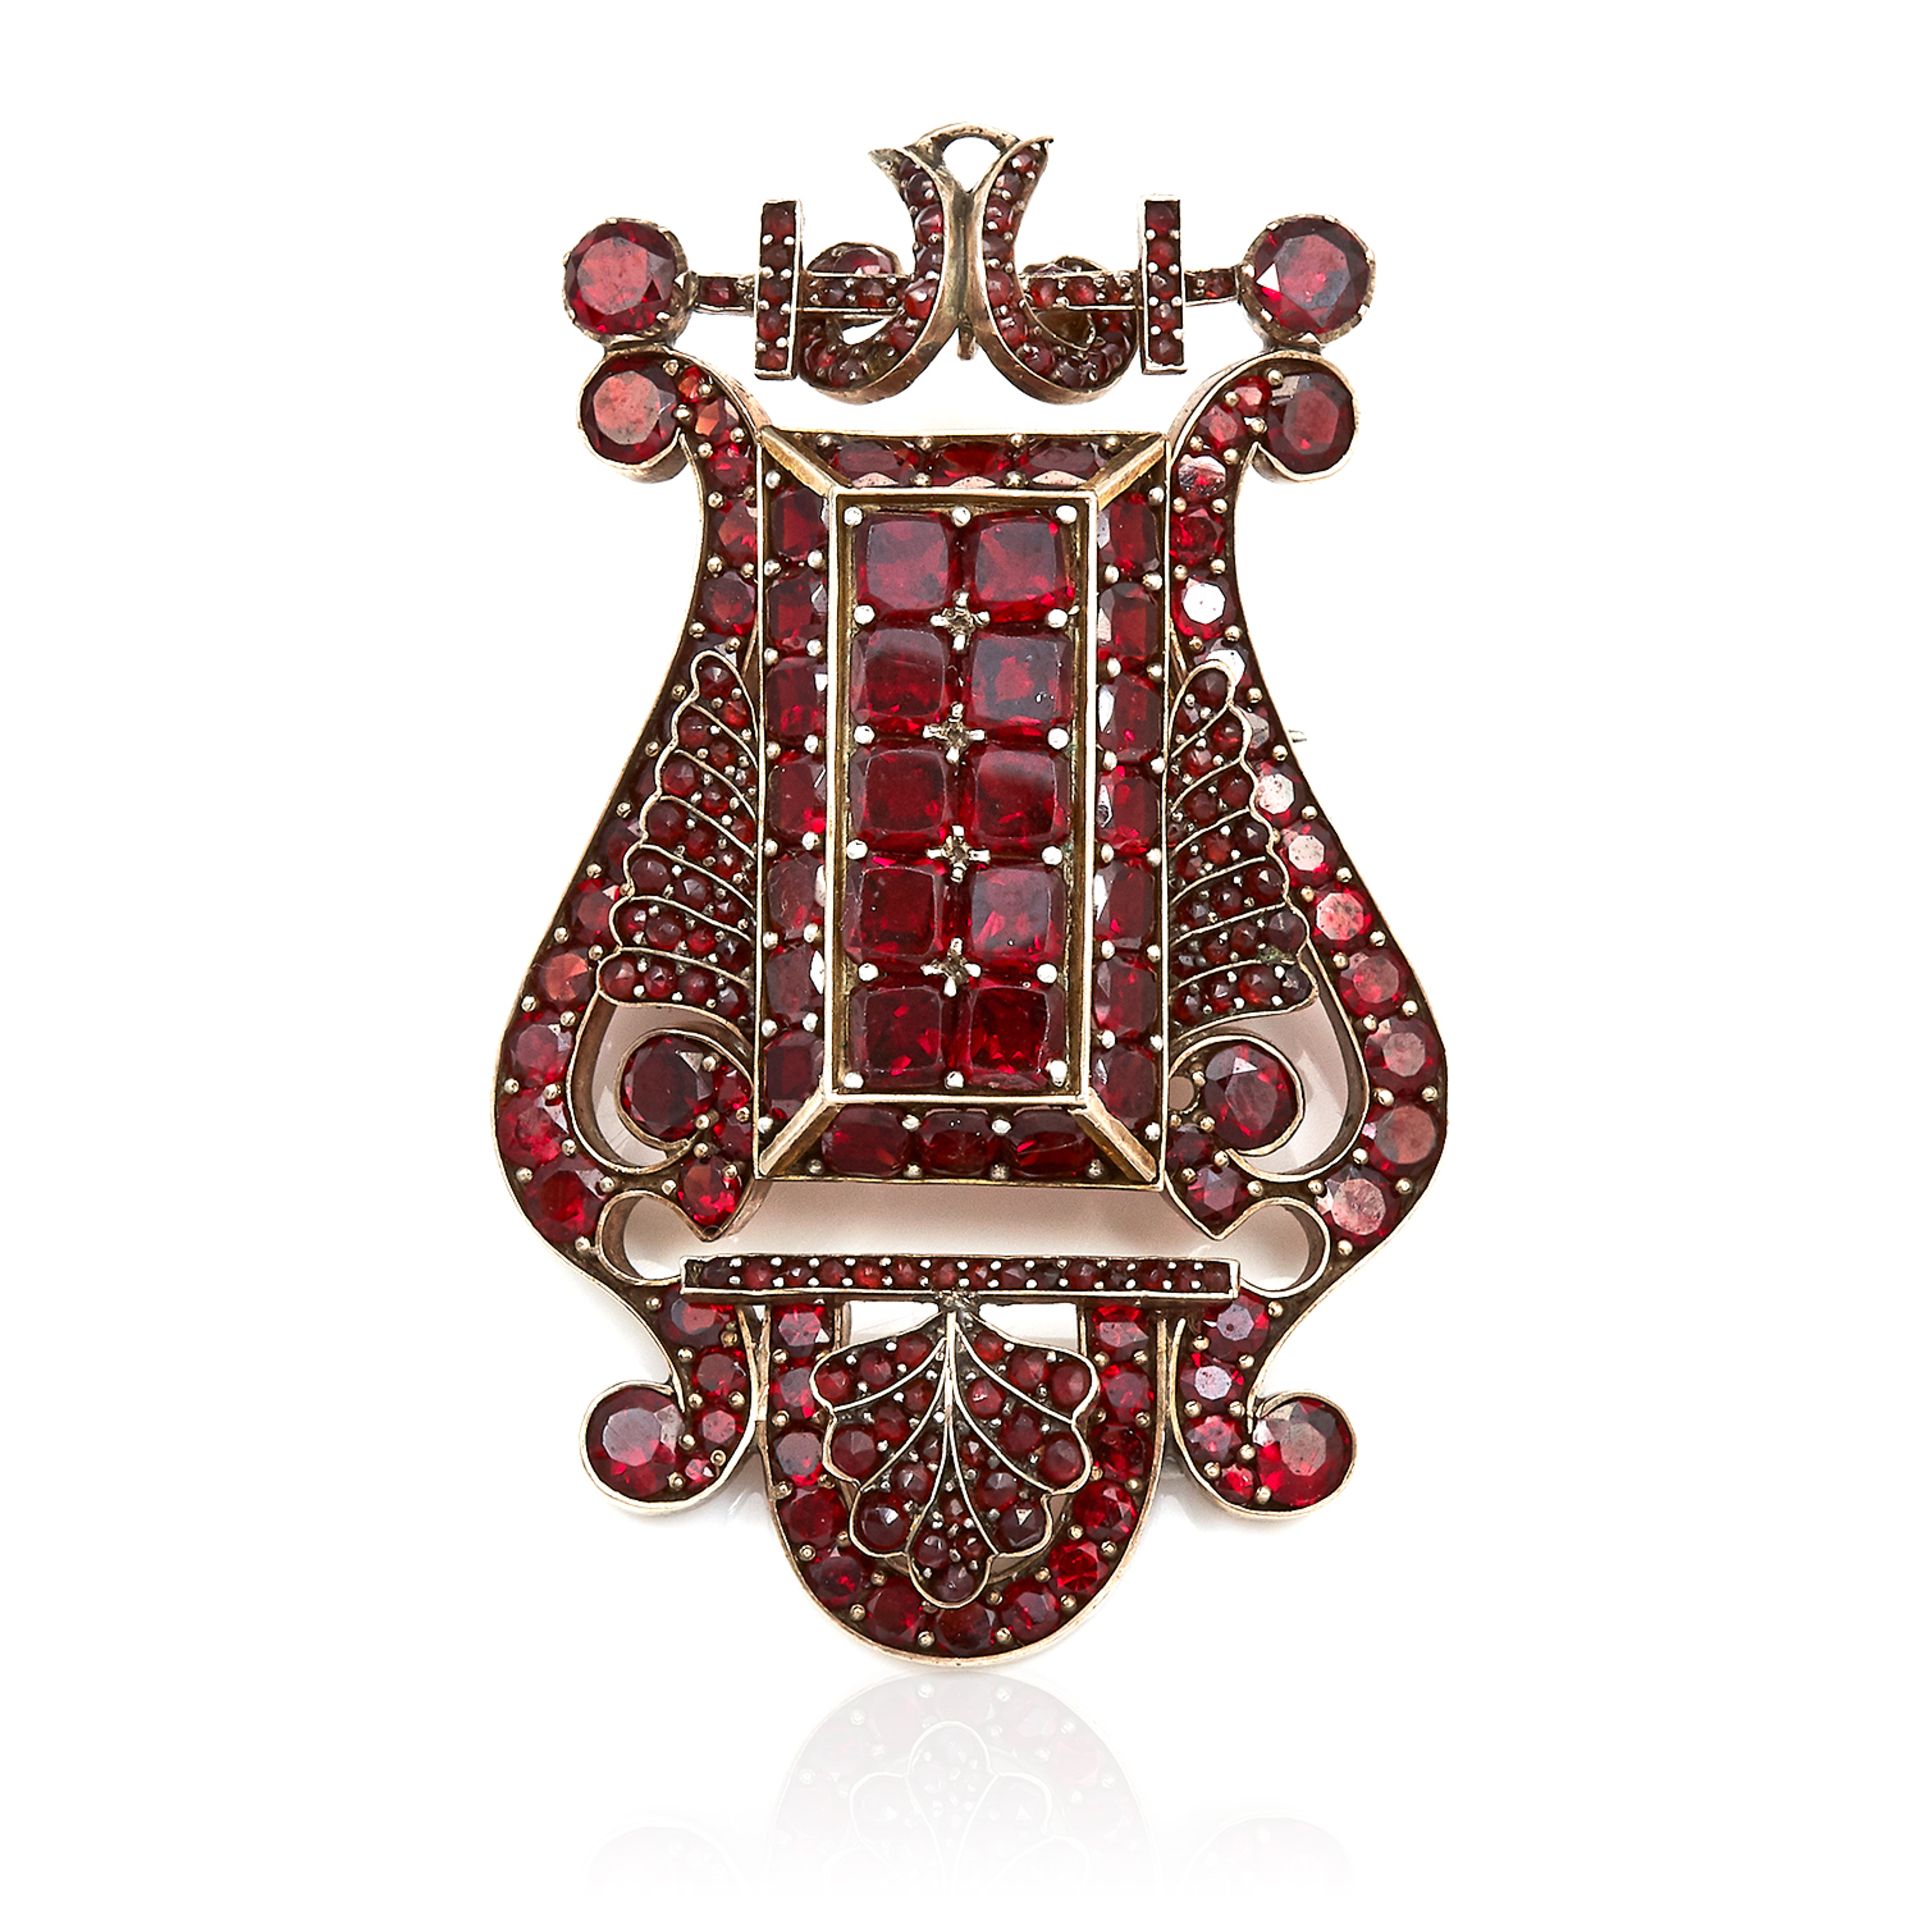 AN ANTIQUE GARNET PENDANT / BROOCH in yellow gold, set with round and flat cut garnets, apparently